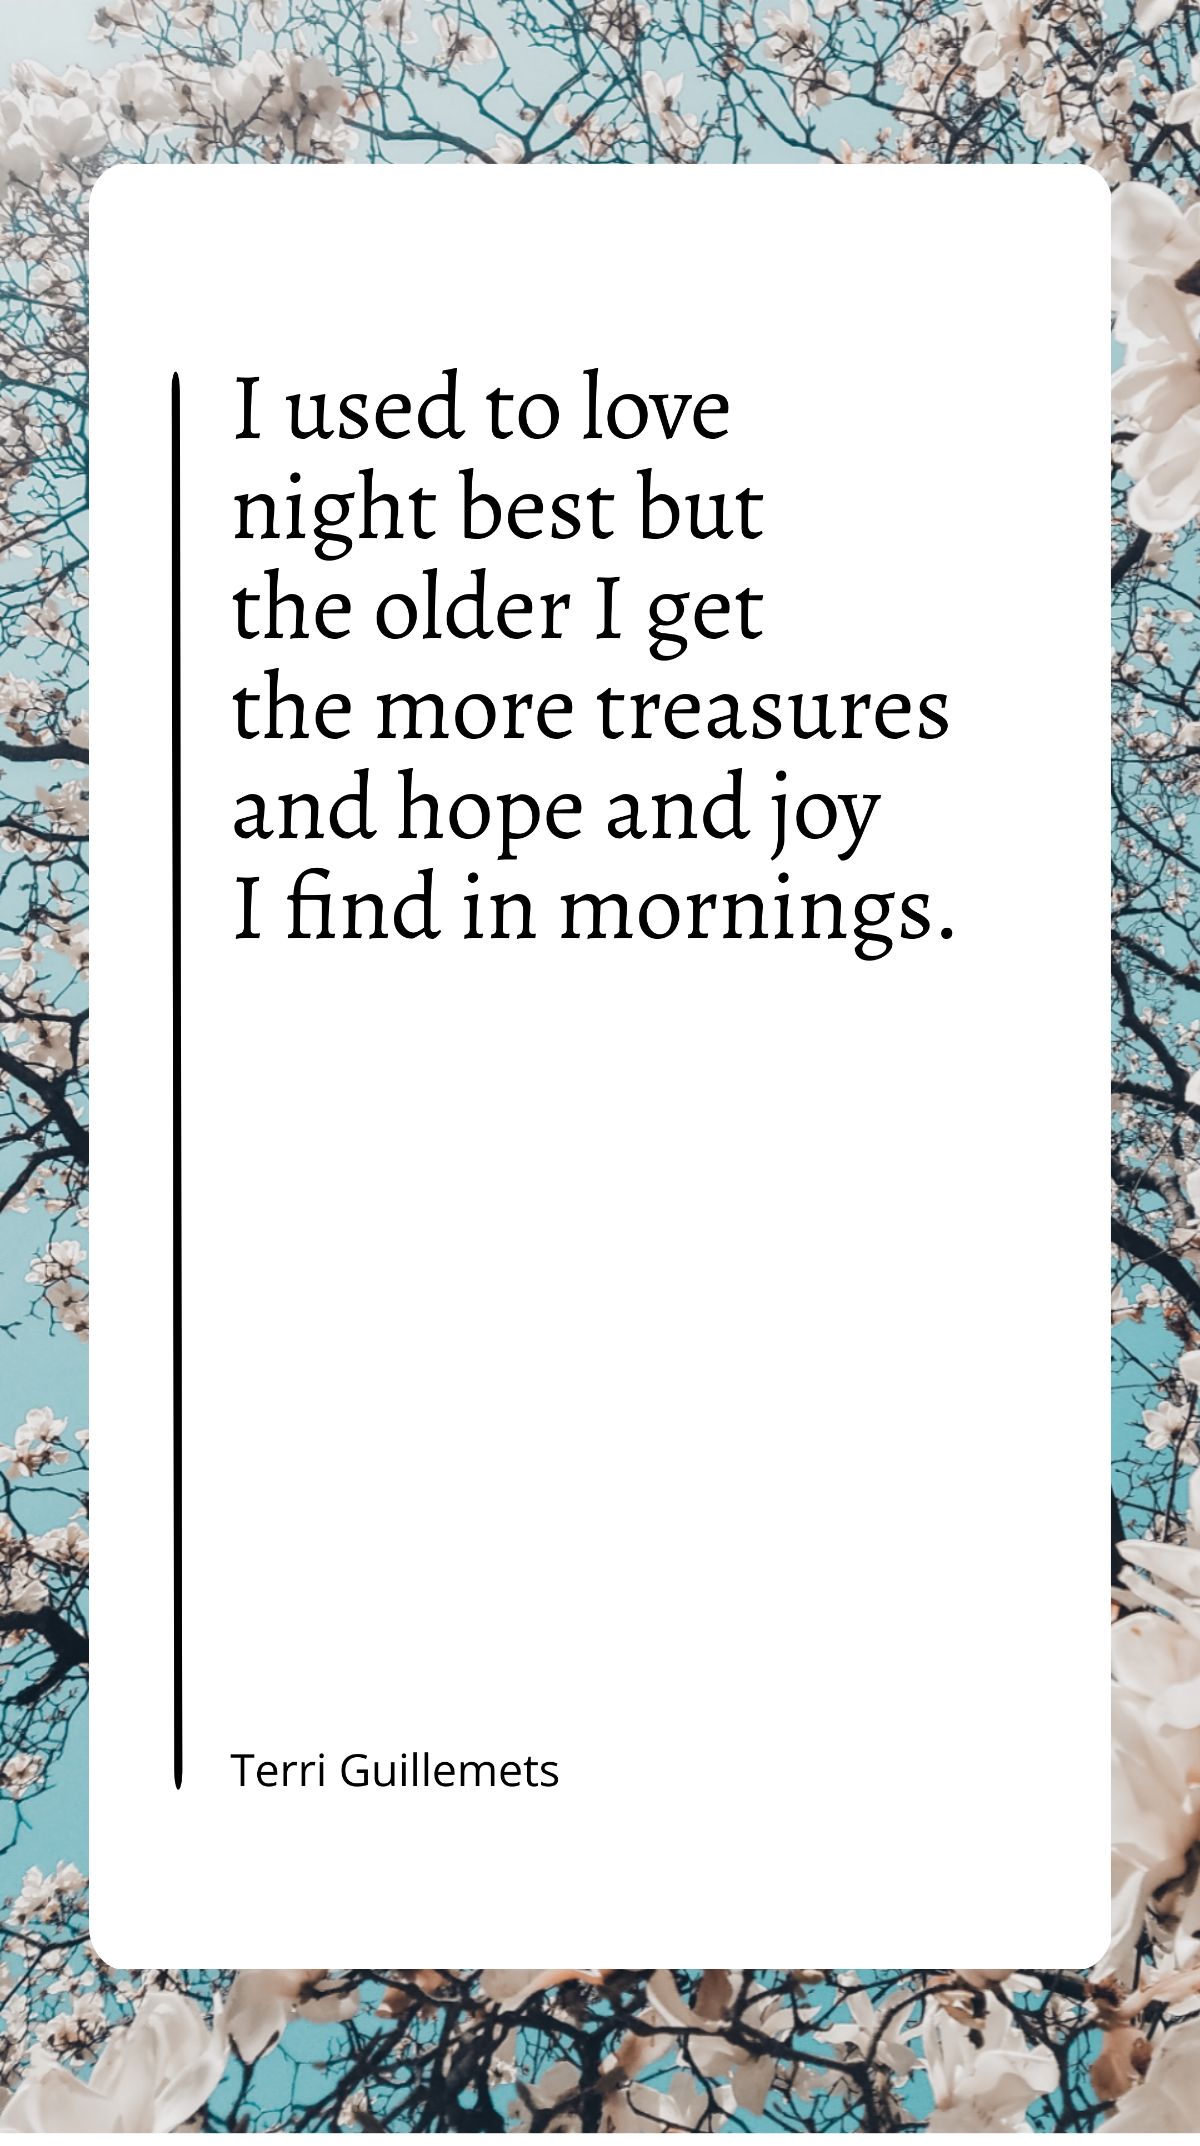 Terri Guillemets - I used to love night best but the older I get the more treasures and hope and joy I find in mornings. Template